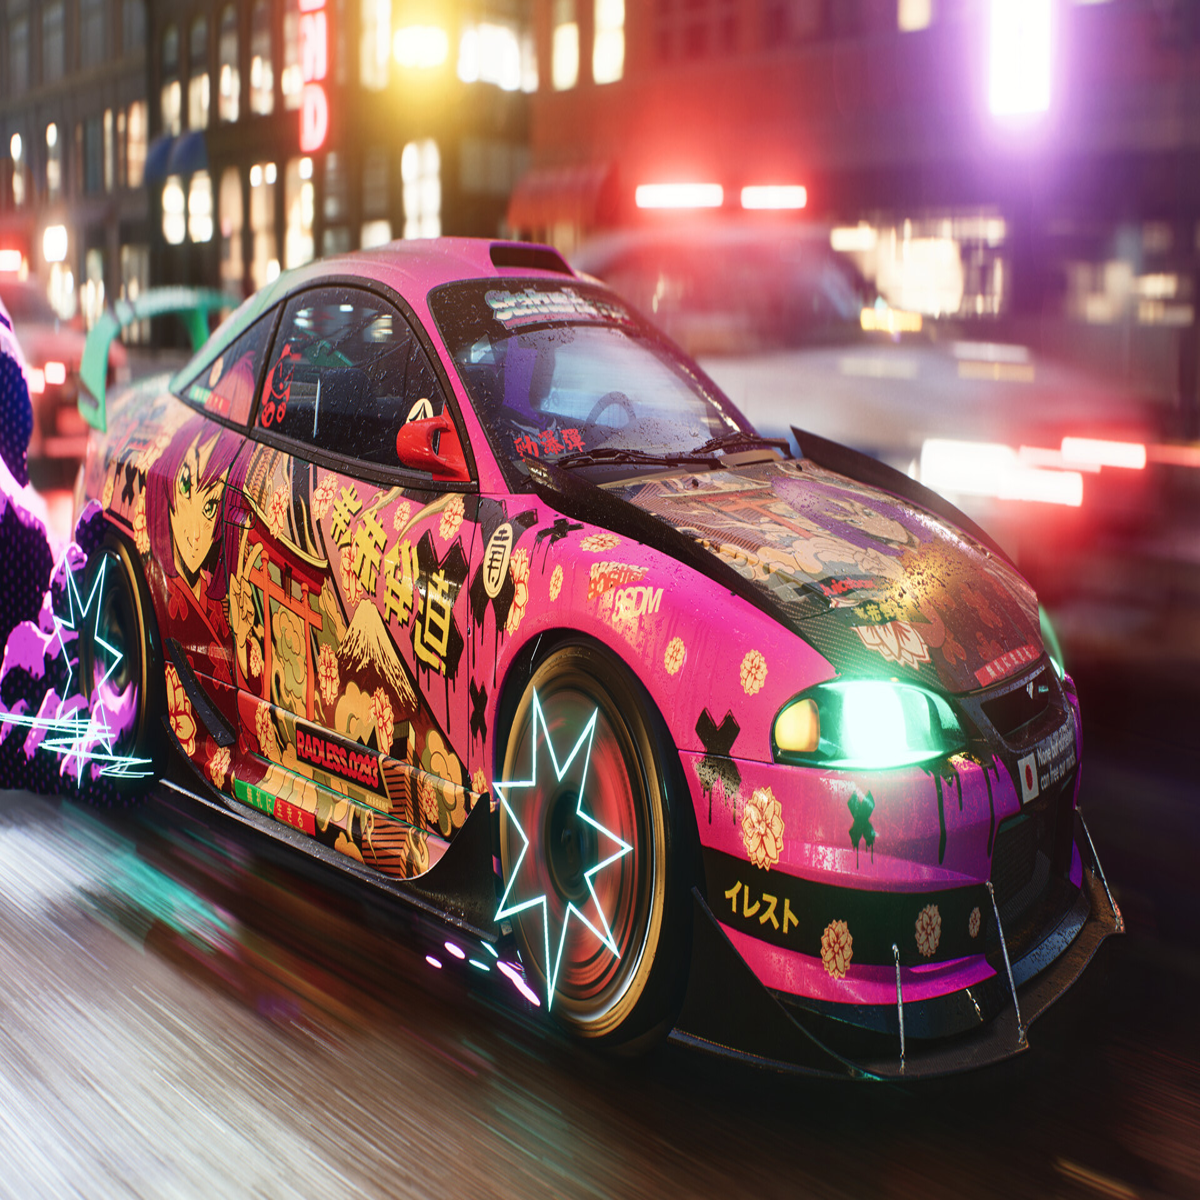 Need for Speed Unbound Online Won't Have Cops at Launch